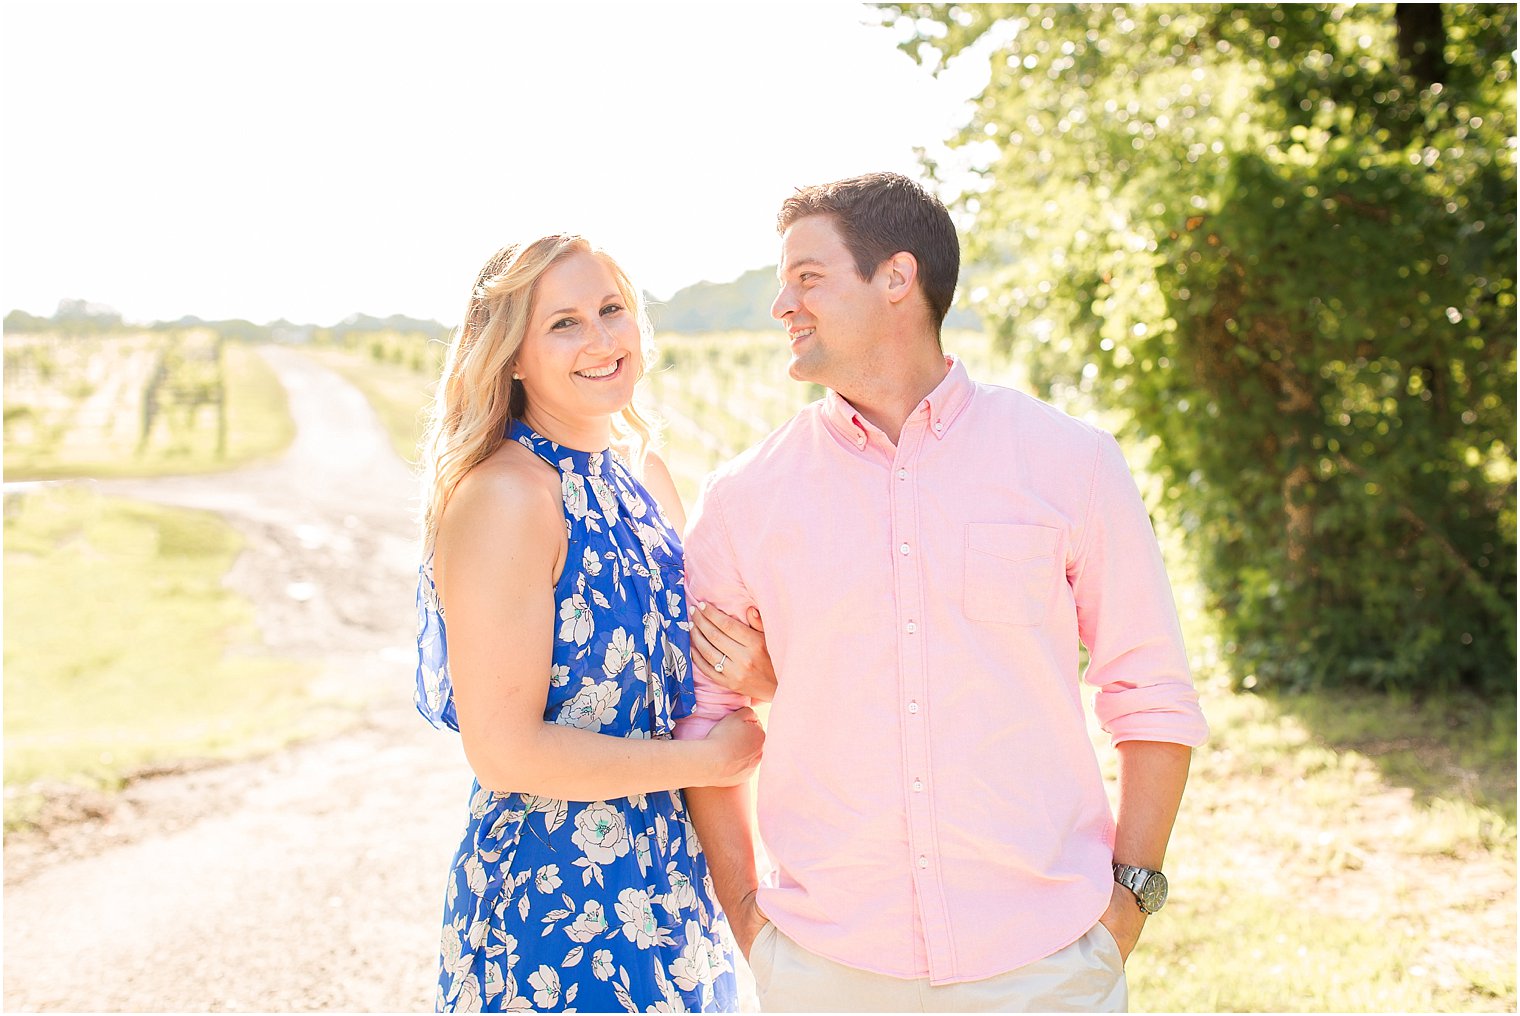 Summer engagement session at Laurita Winery